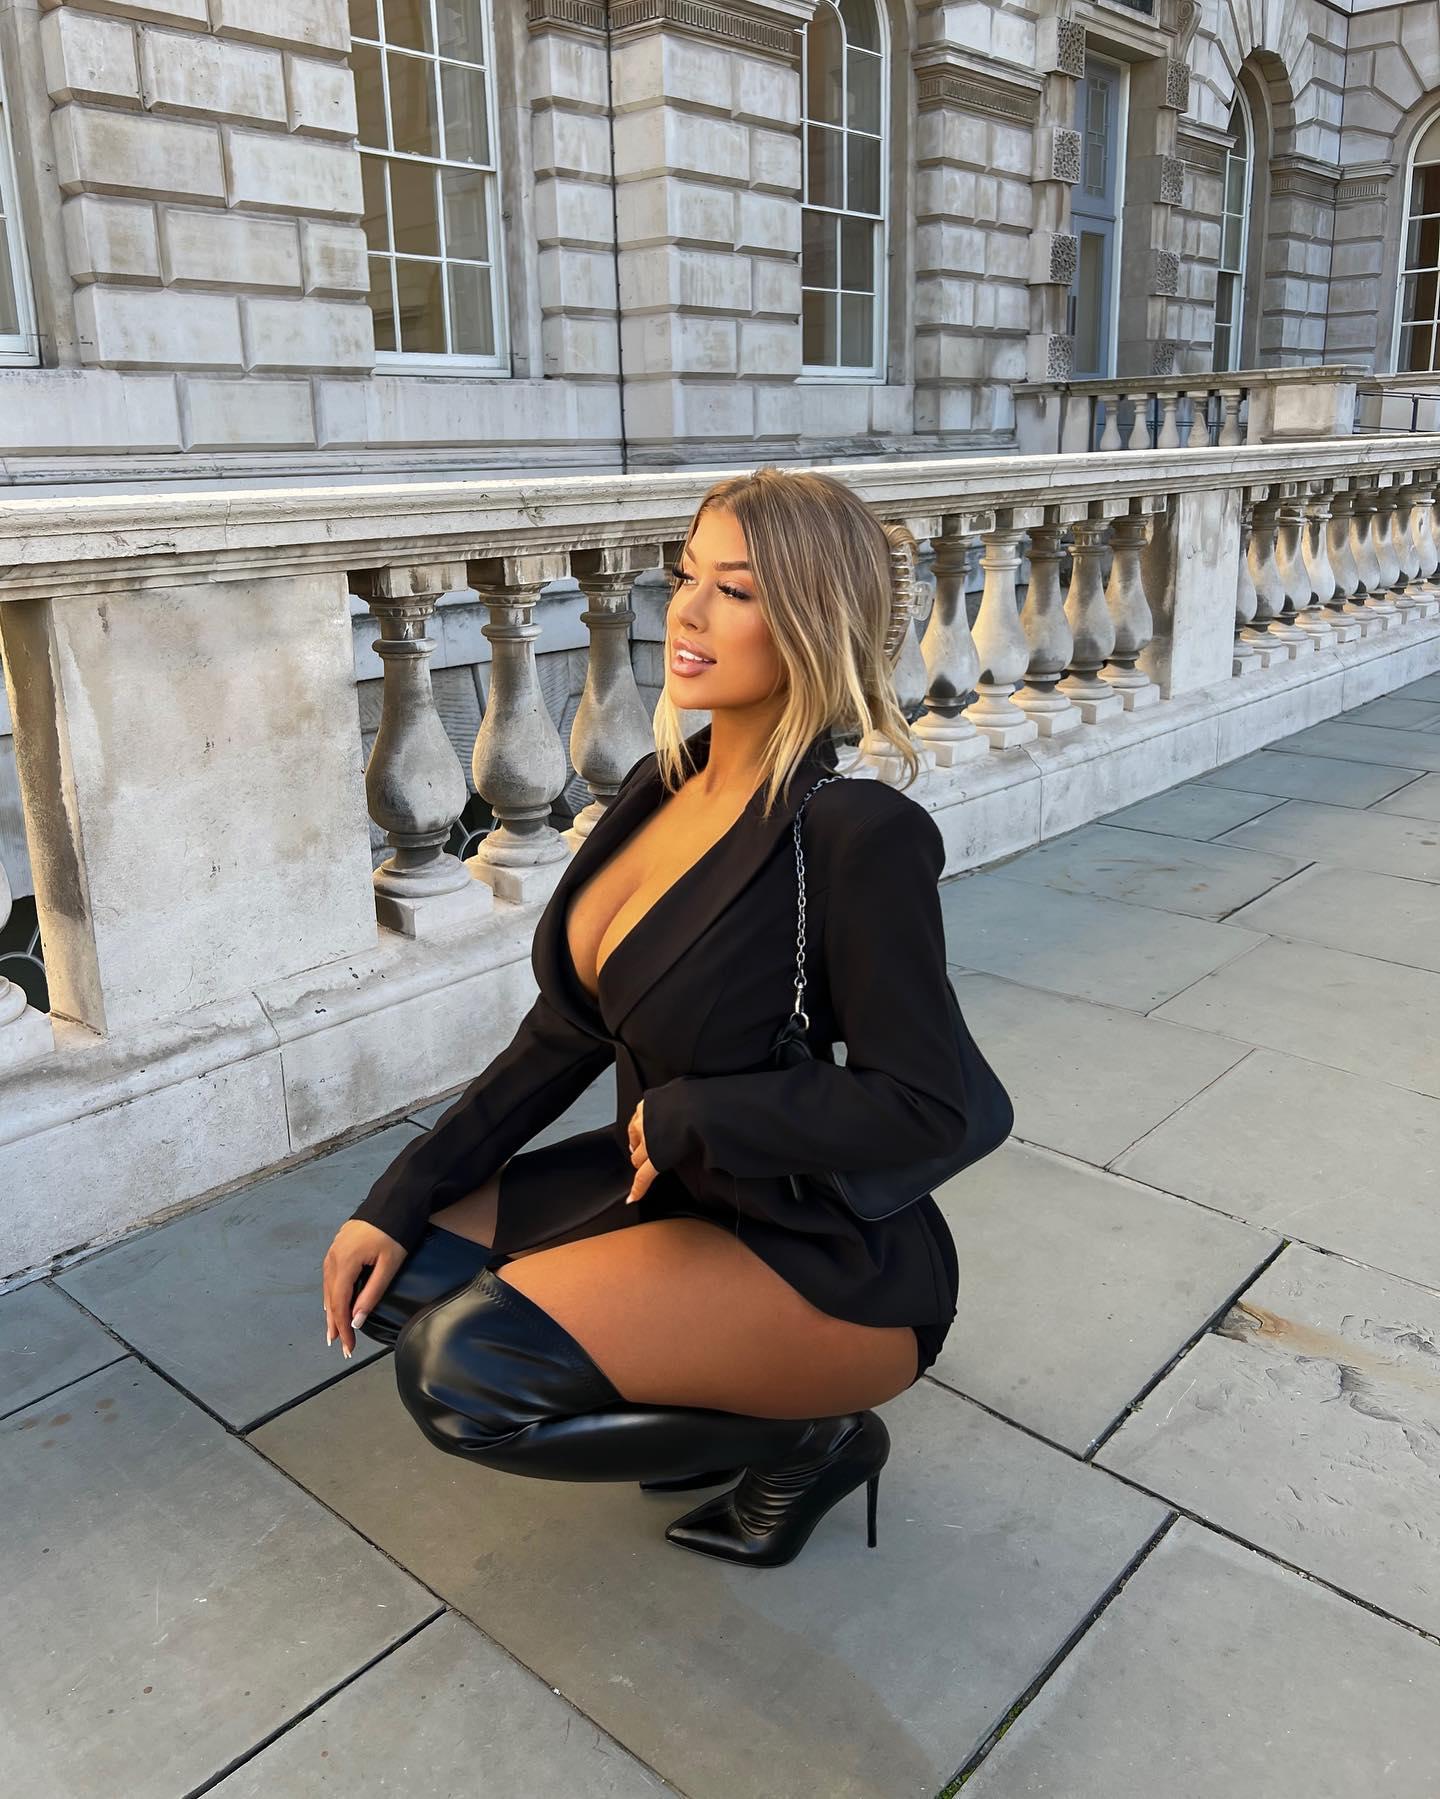 Eve Gale in a black outfit